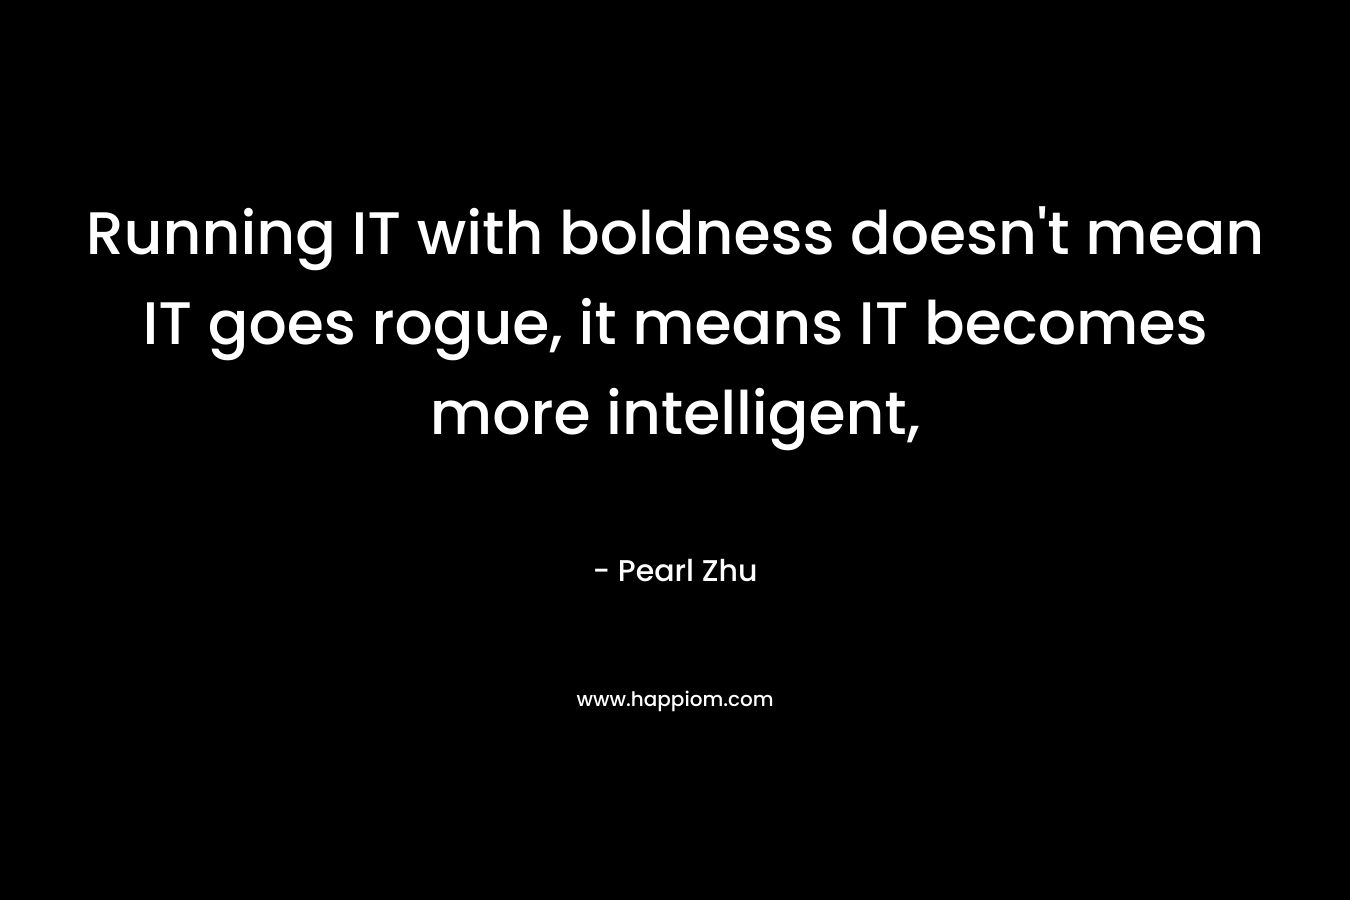 Running IT with boldness doesn't mean IT goes rogue, it means IT becomes more intelligent,